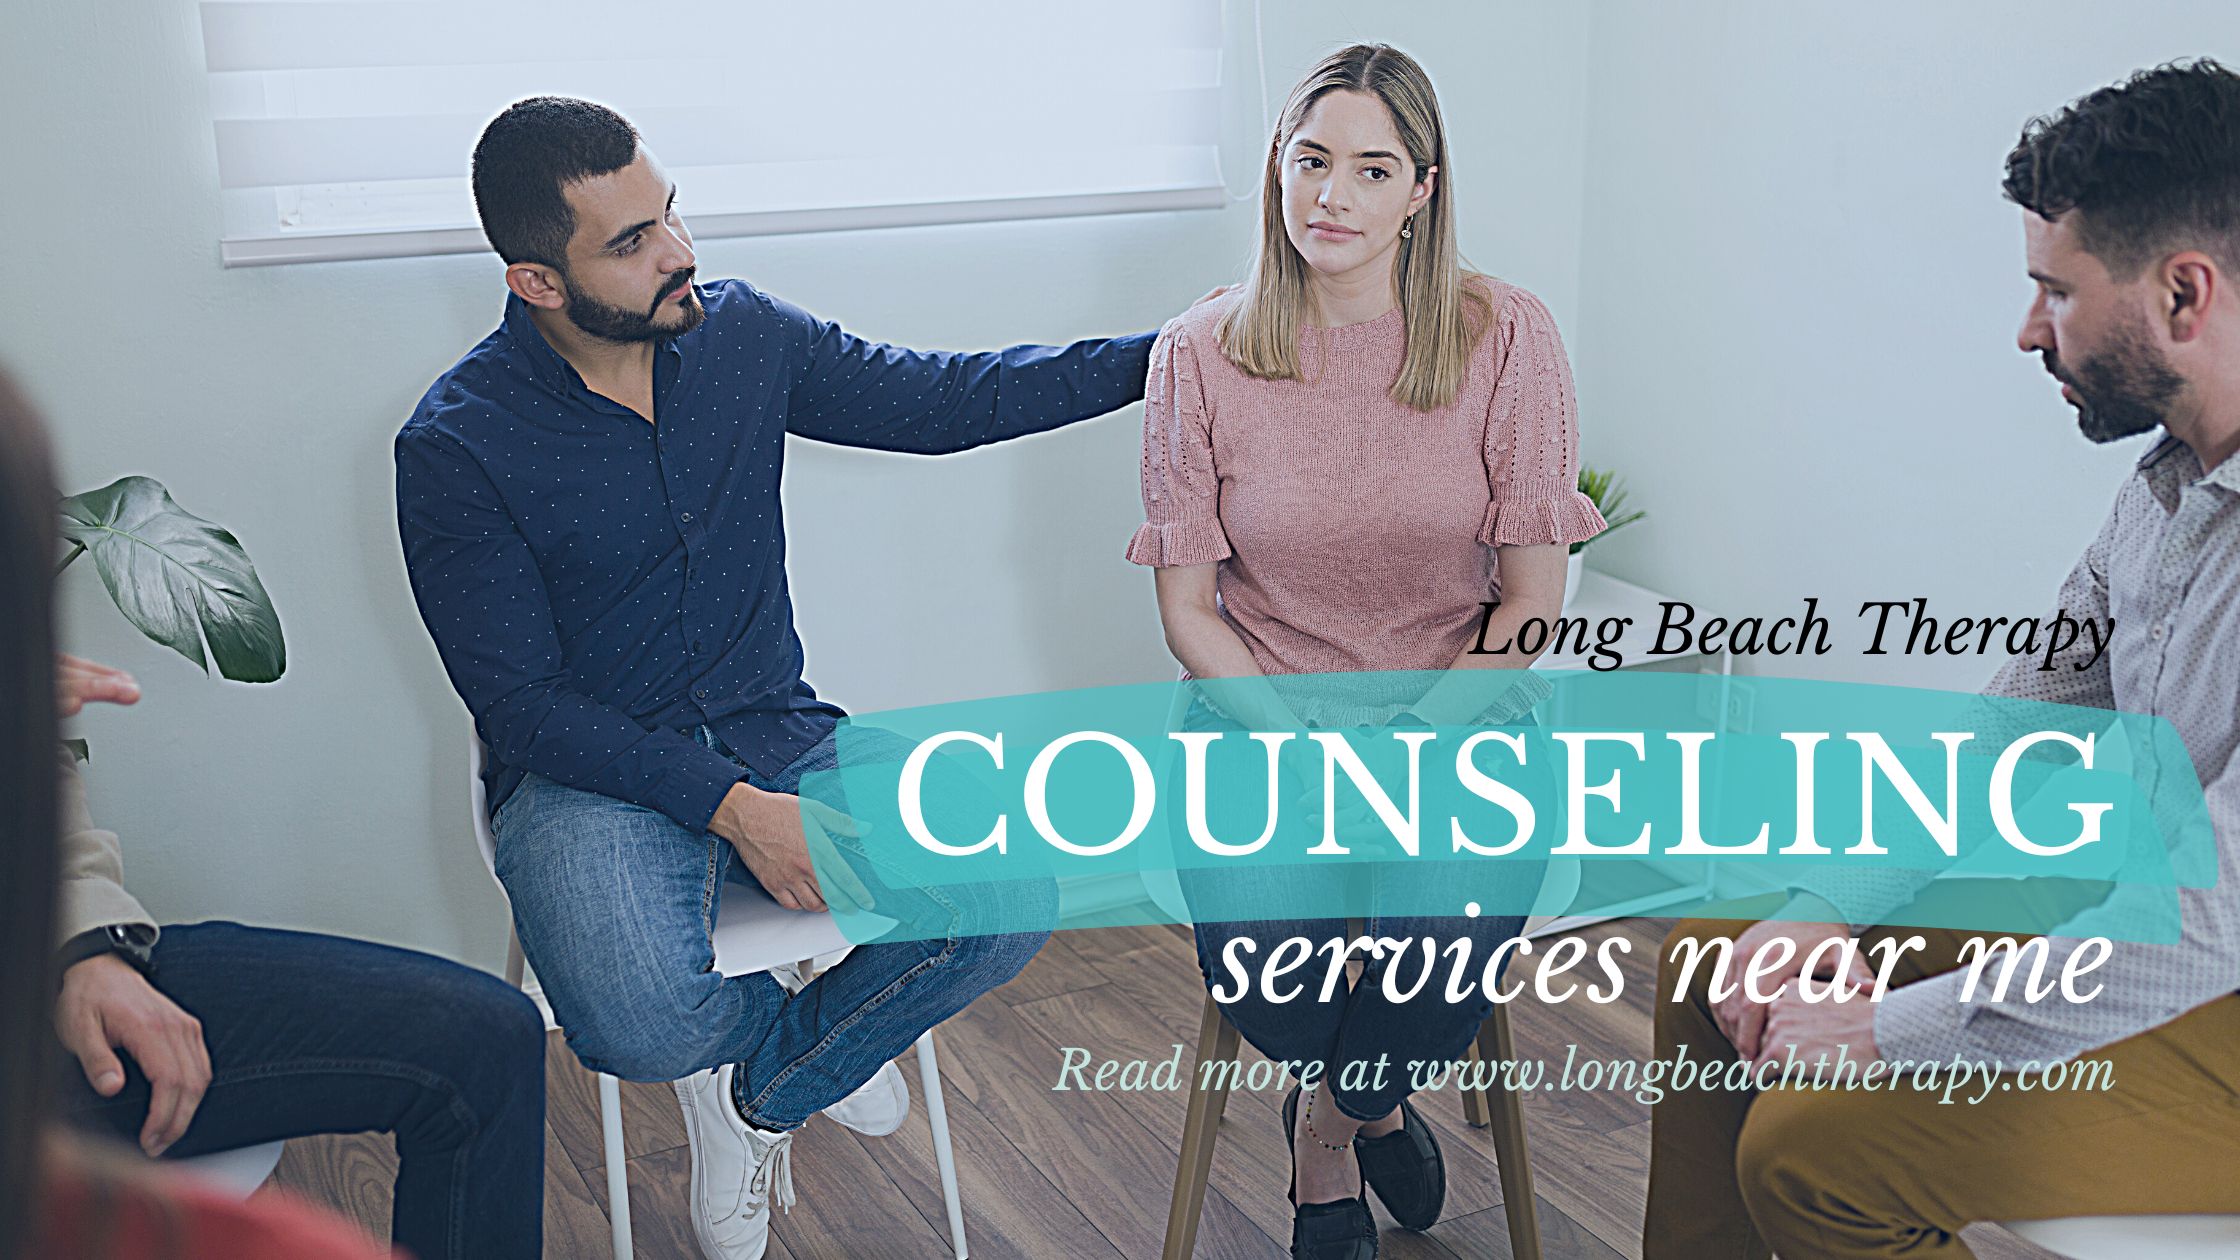 Best marriage counseling near me